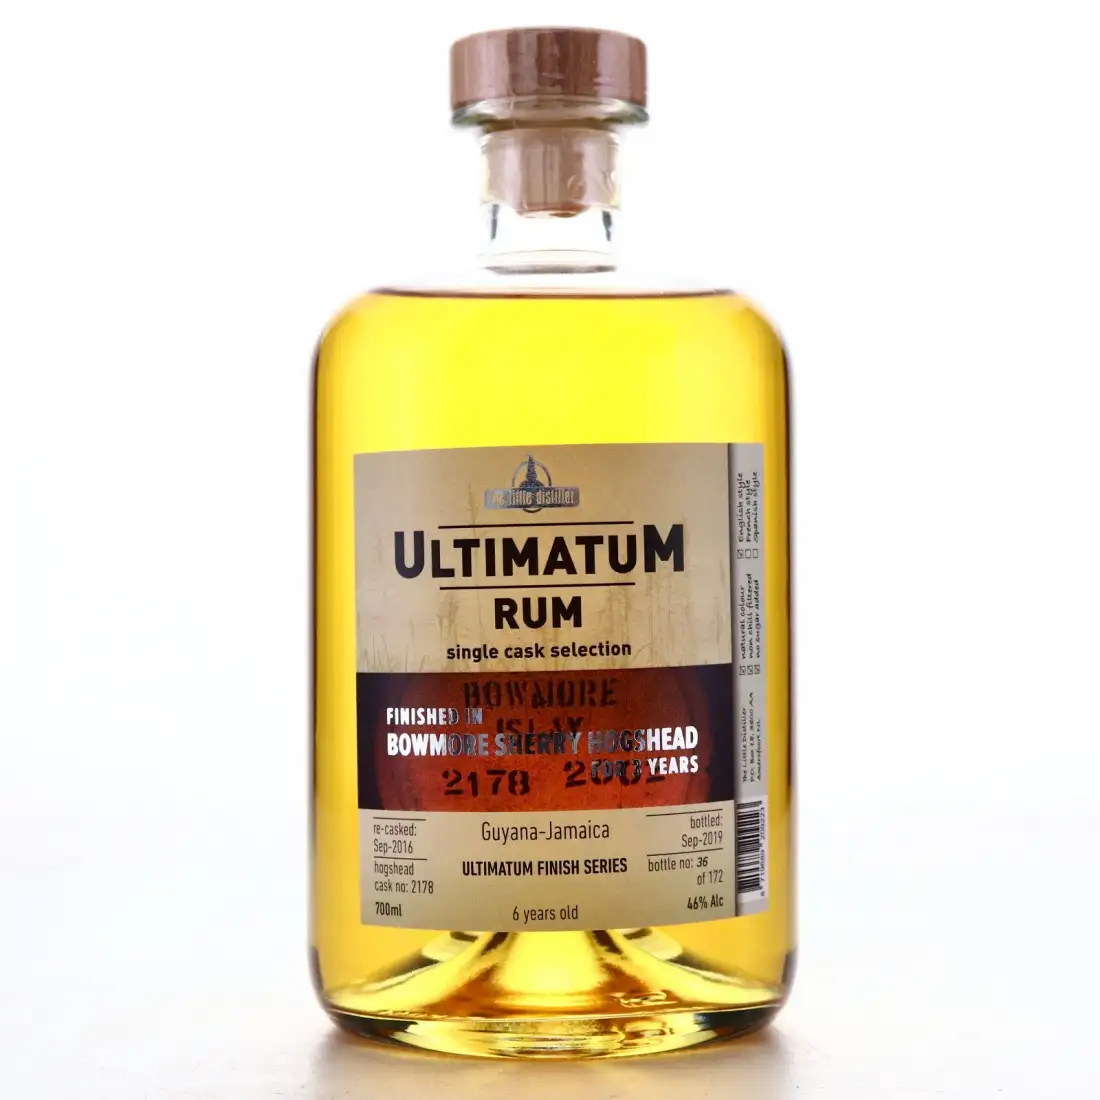 Image of the front of the bottle of the rum Ultimatum Rum (Finished in Bowmore Sherry Hogshead)